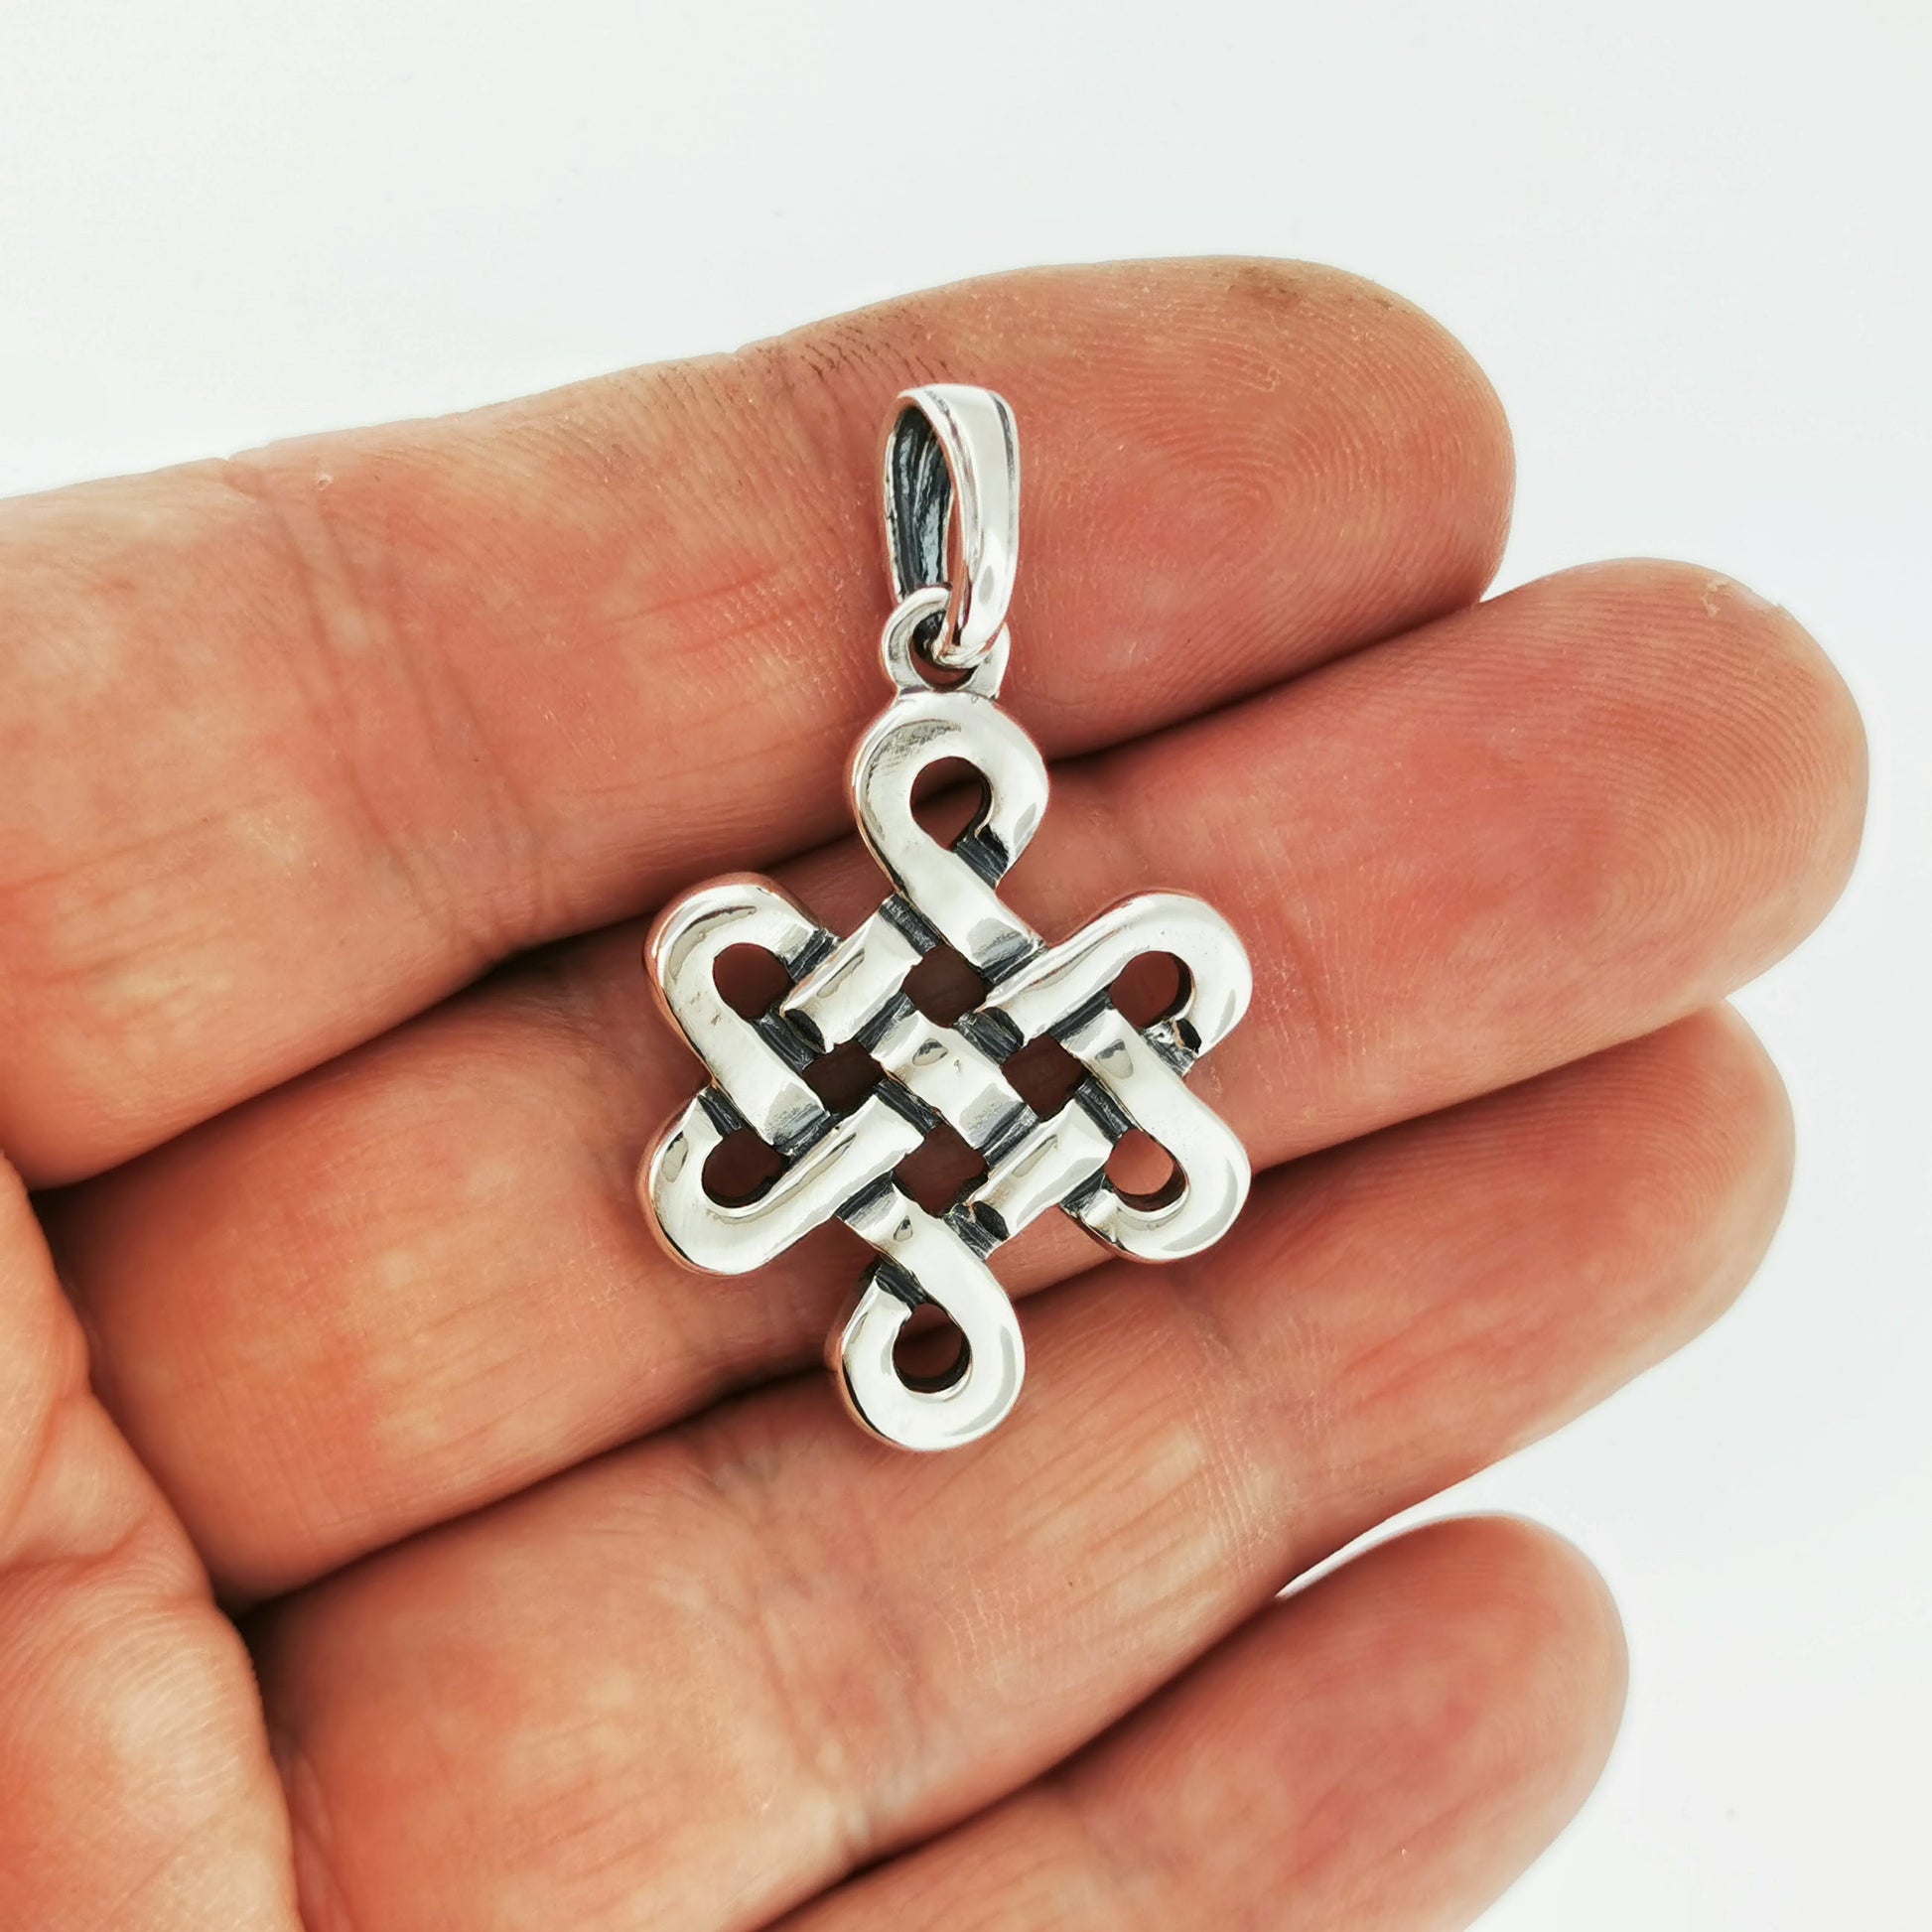 Large Endless Knot Pendant in Sterling Silver or Antique Bronze, Shrivatsa Silver Pendant, Shrivatsa Bronze Pendant, Silver Celtic Jewelry, Silver Celtic Jewellery, Bronze Celtic Jewelry, Bronze Celtic Jewellery, Silver Endless Knot Pendant, Bronze Endless Knot Pendant, Gold Chinese Knot Pendant, Silver Iirsh Jewelry, Silver Irish Jewellery, Asian Knot Pendant